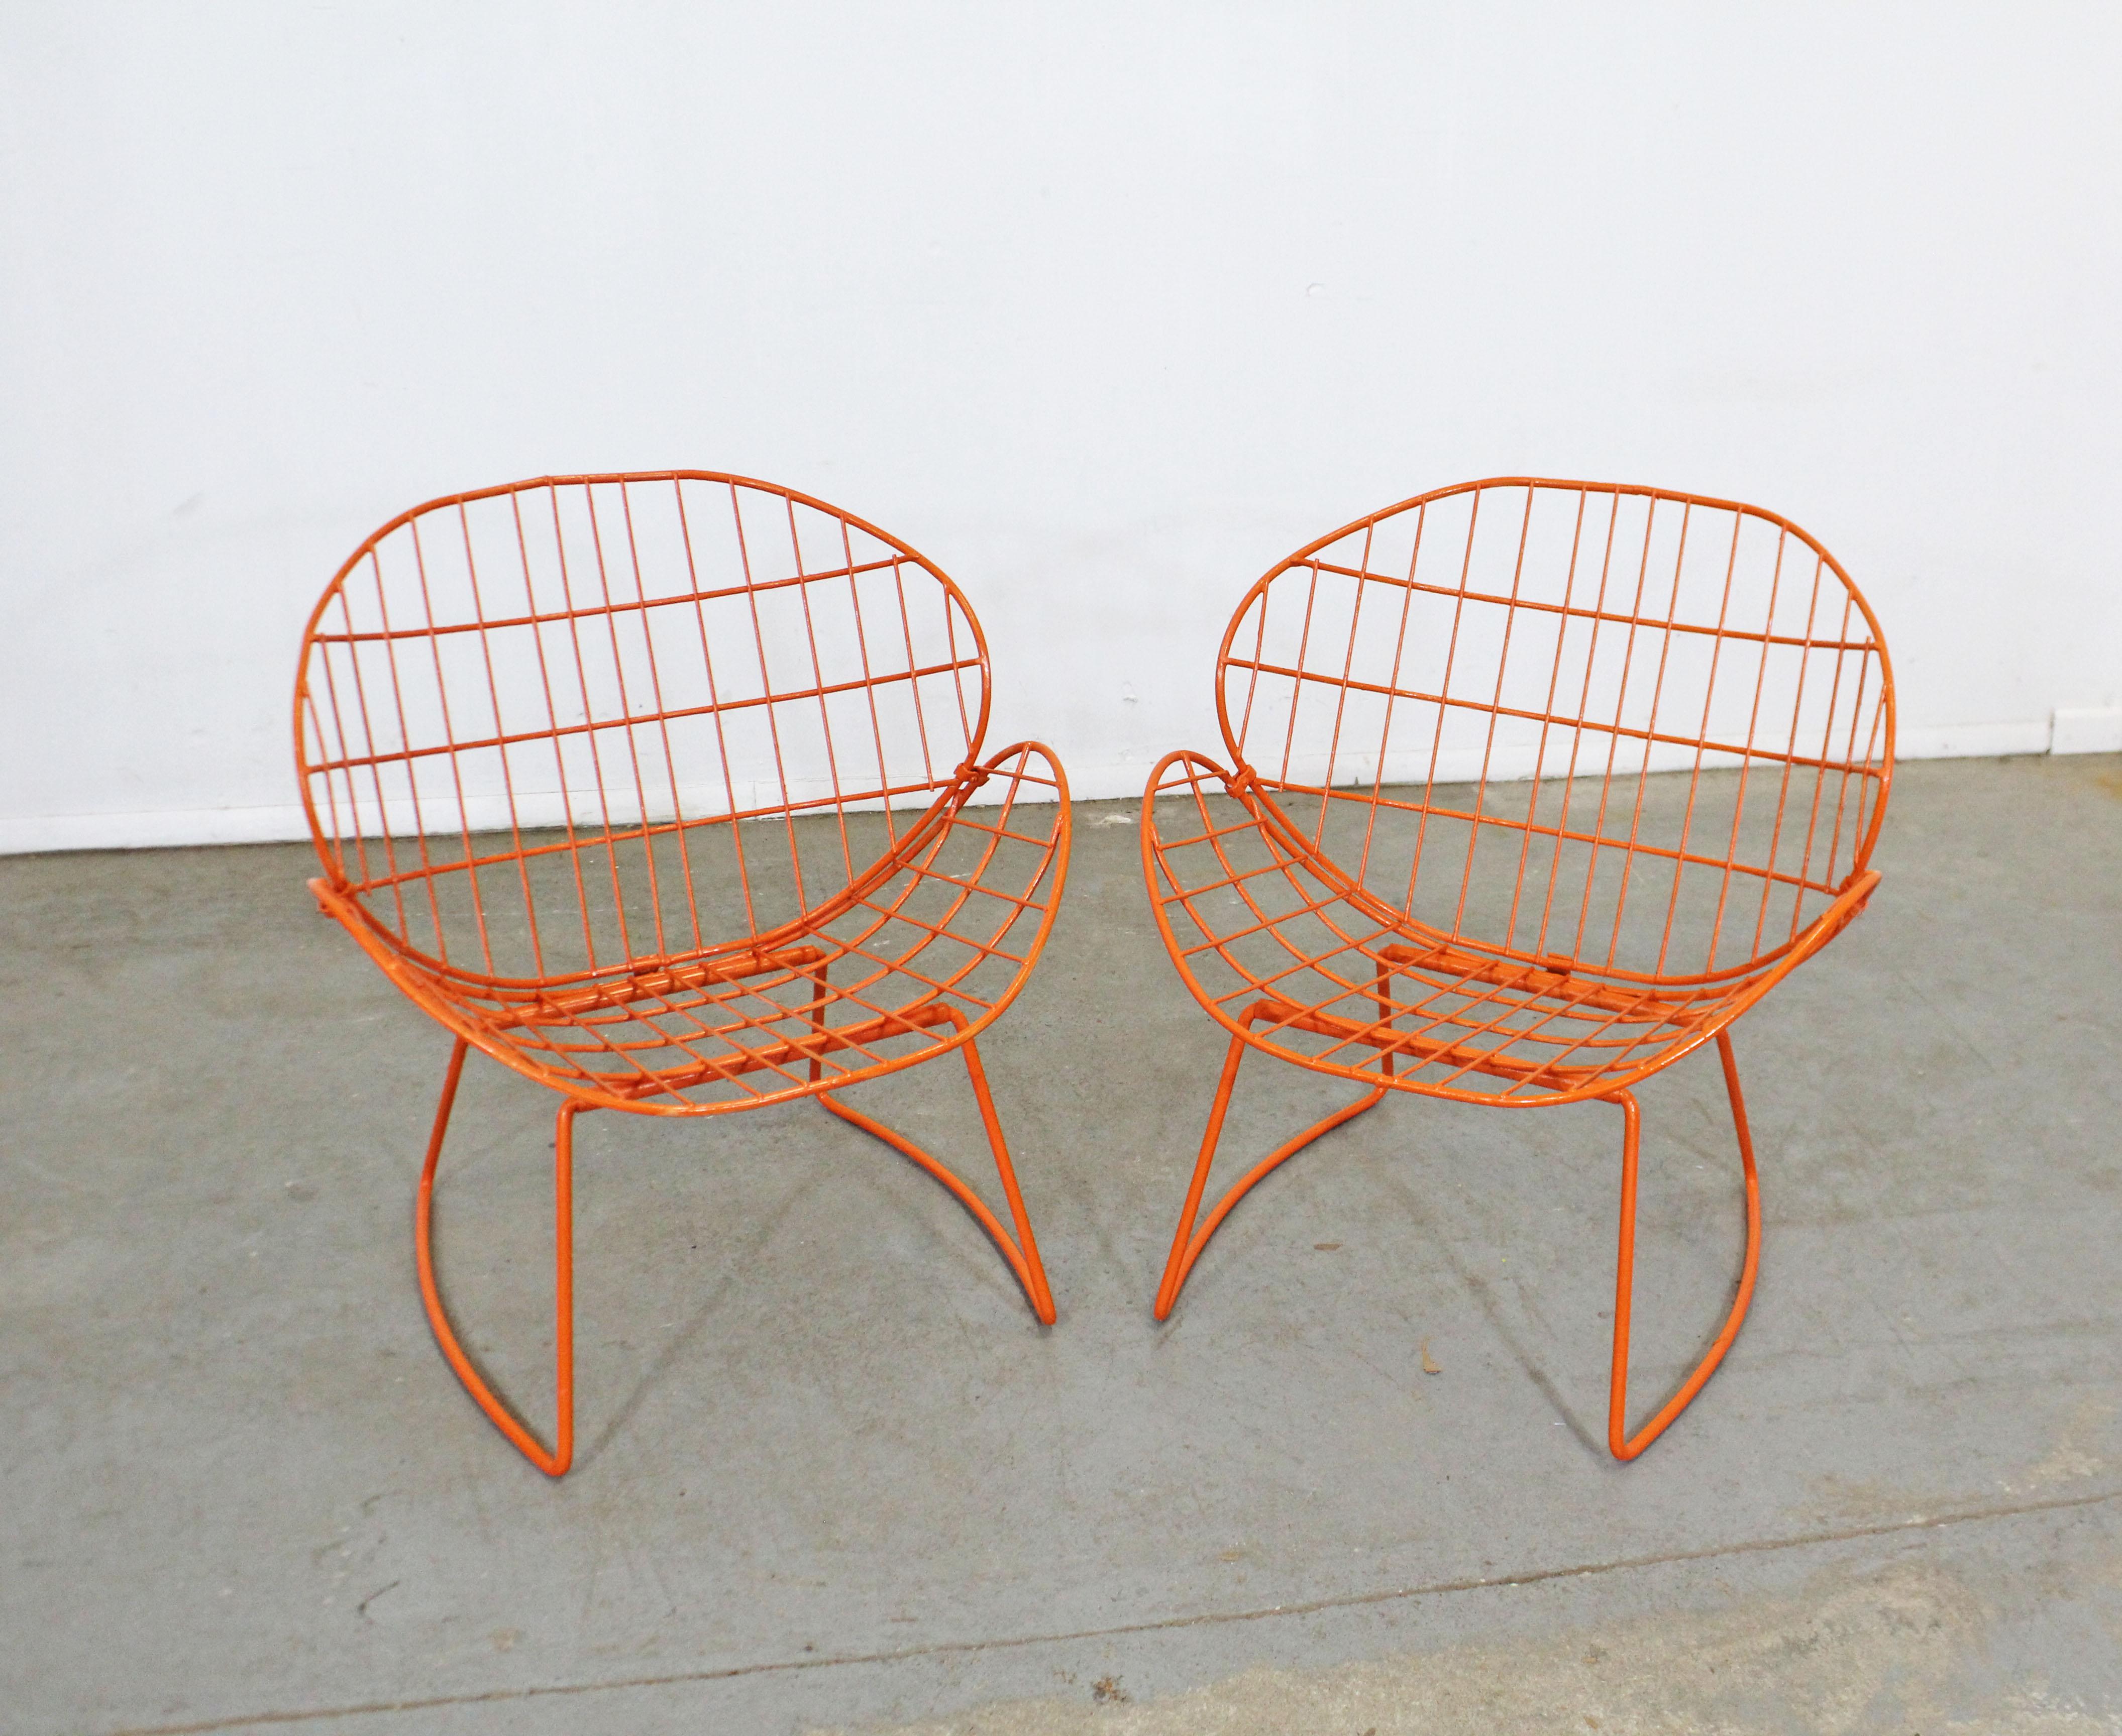 What a find. Offered is a pair of awesome vintage iron 'clam shell' outdoor/patio chairs. These chairs are extremely unique, featuring clam-shaped wire backs and seats with curved legs. They're in excellent condition, structurally sound, and have